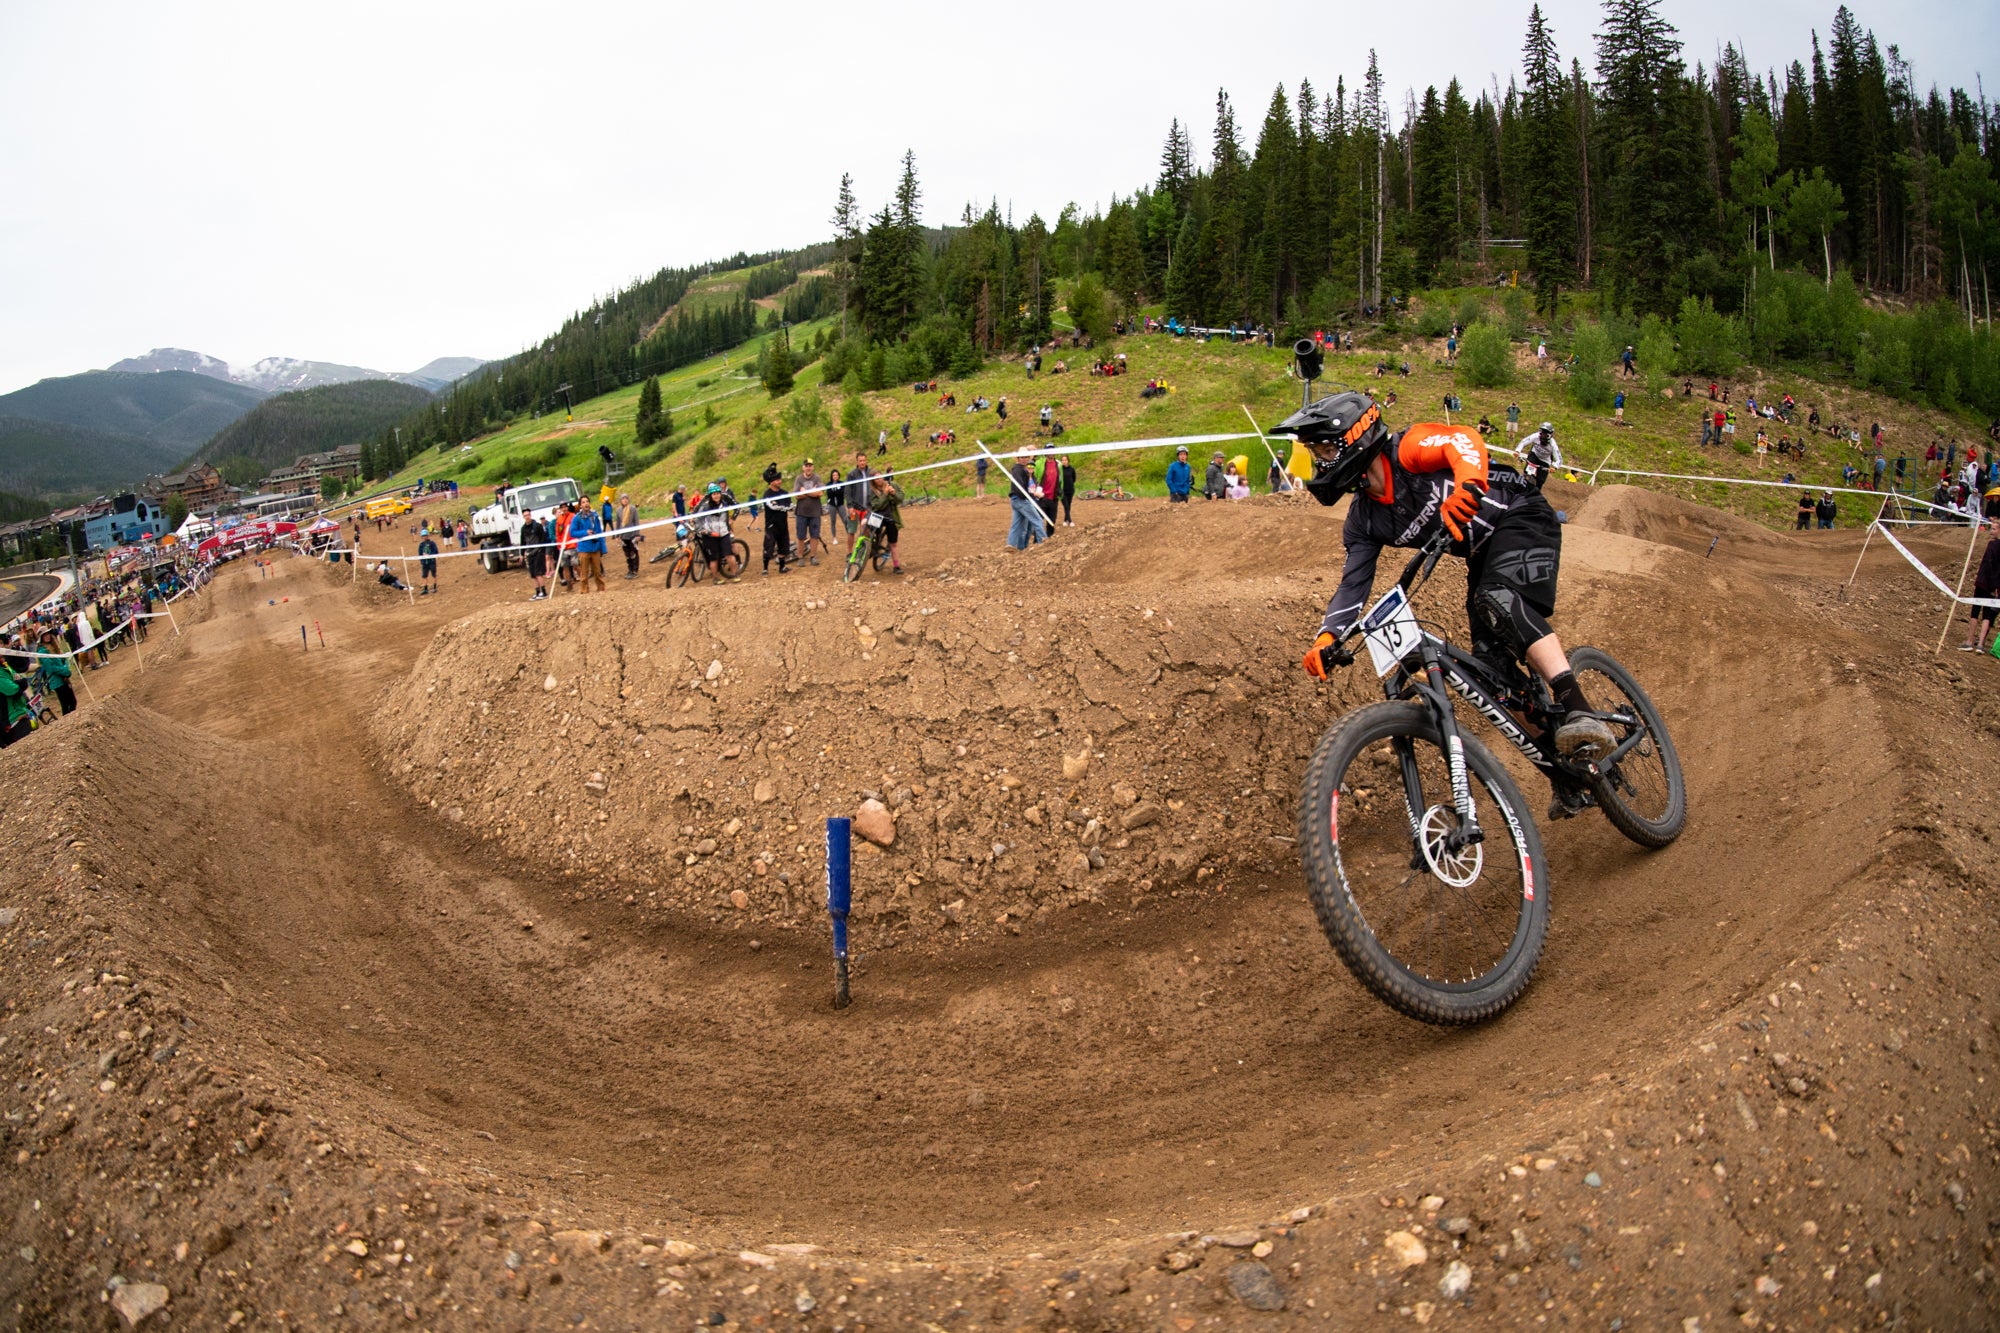 Tommy Zula Places 3rd In Pro Dual Slalom At Nationals